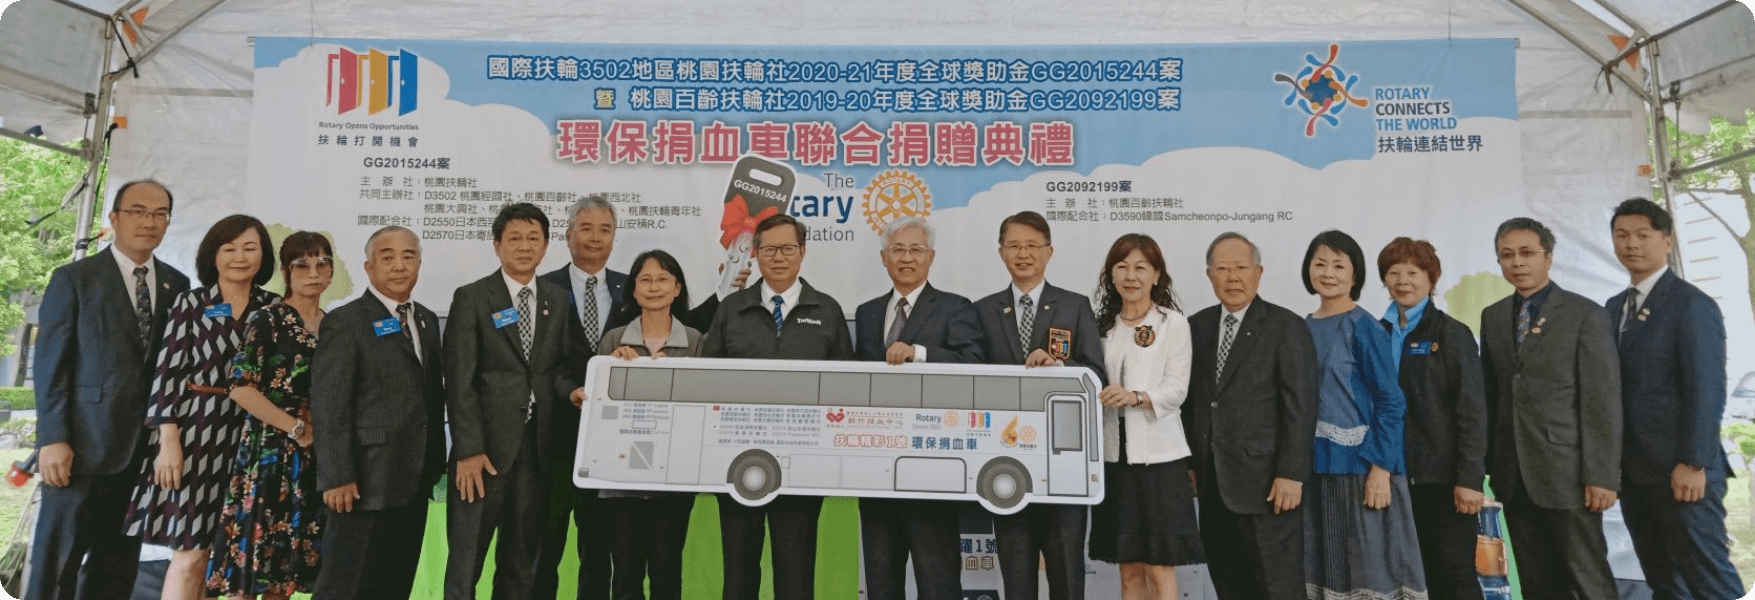 The picture shows the environmentally friendly blood donation vehicle donated by Rotary International 3502 to the Hsinchu Blood Donation Center. Taoyuan Mayor Zheng Wencan (8th from left), Deputy Director of the Health Bureau Chen Lijuan (7th from left), Regional Director of Rotary International 3502 Zhu Lide (7th from right), Taoyuan Rotary President Lu Li-hsien (6th from left), President Pan Hao-un of the Rotary Club of Centenary and other distinguished guests attended. Wei Shengtang (8th from right), CEO of the Taiwan Blood Foundation, representing for receiving  the awards.